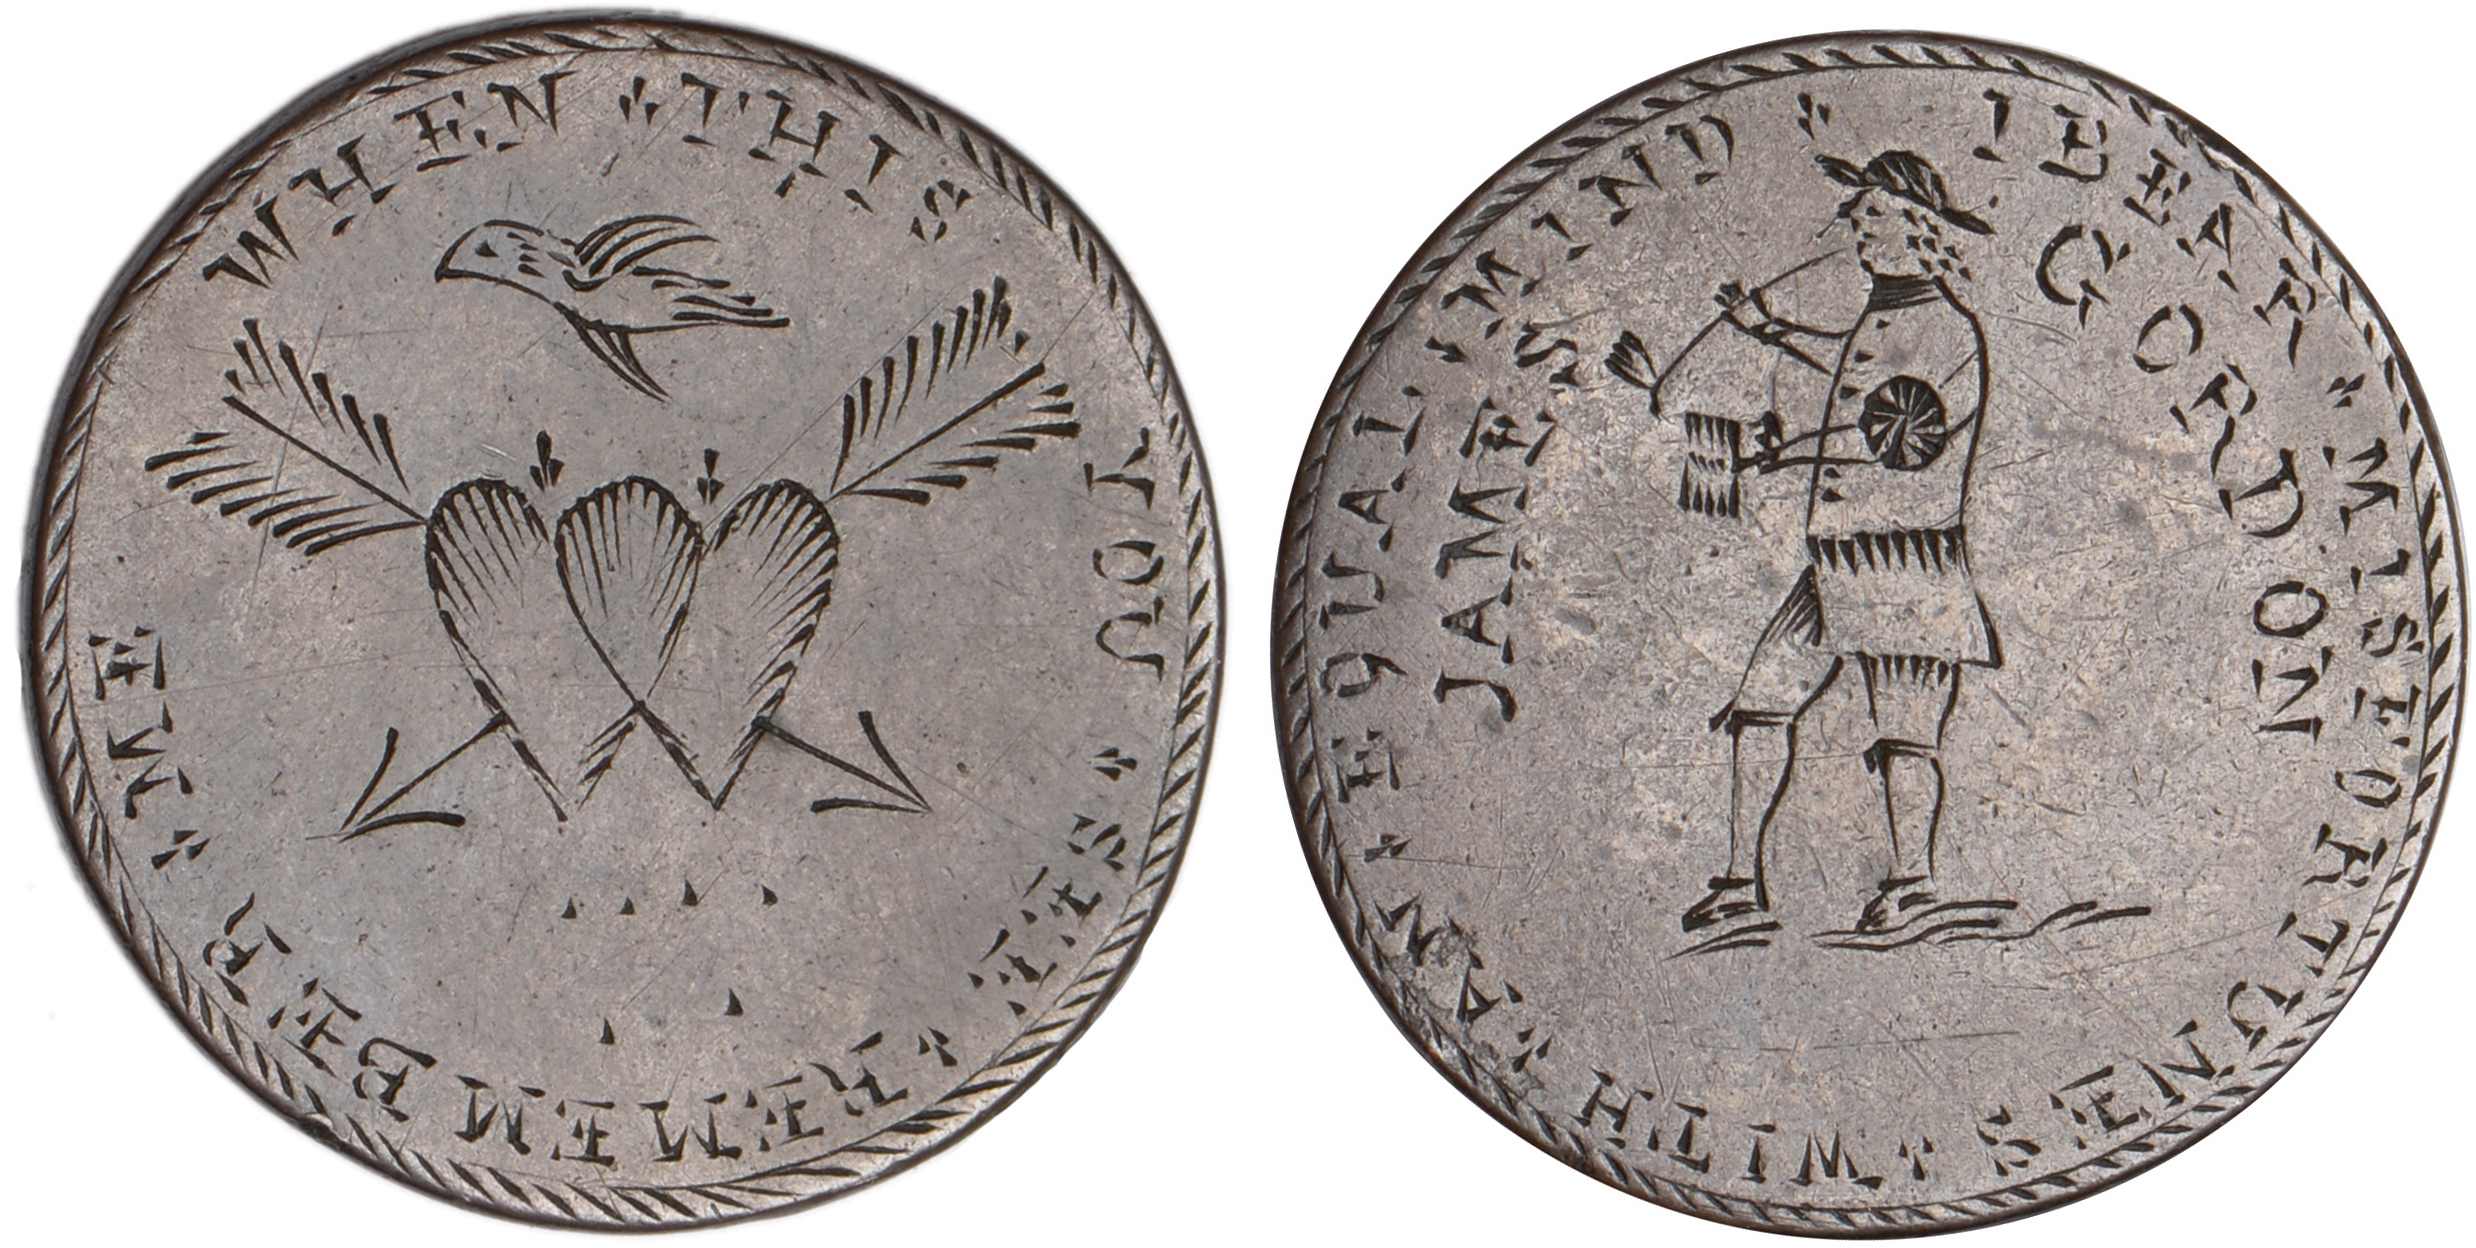 James Gordon, a Georgian halfpenny, smoothed and engraved both sides, JAMES GORDON, a one-legged